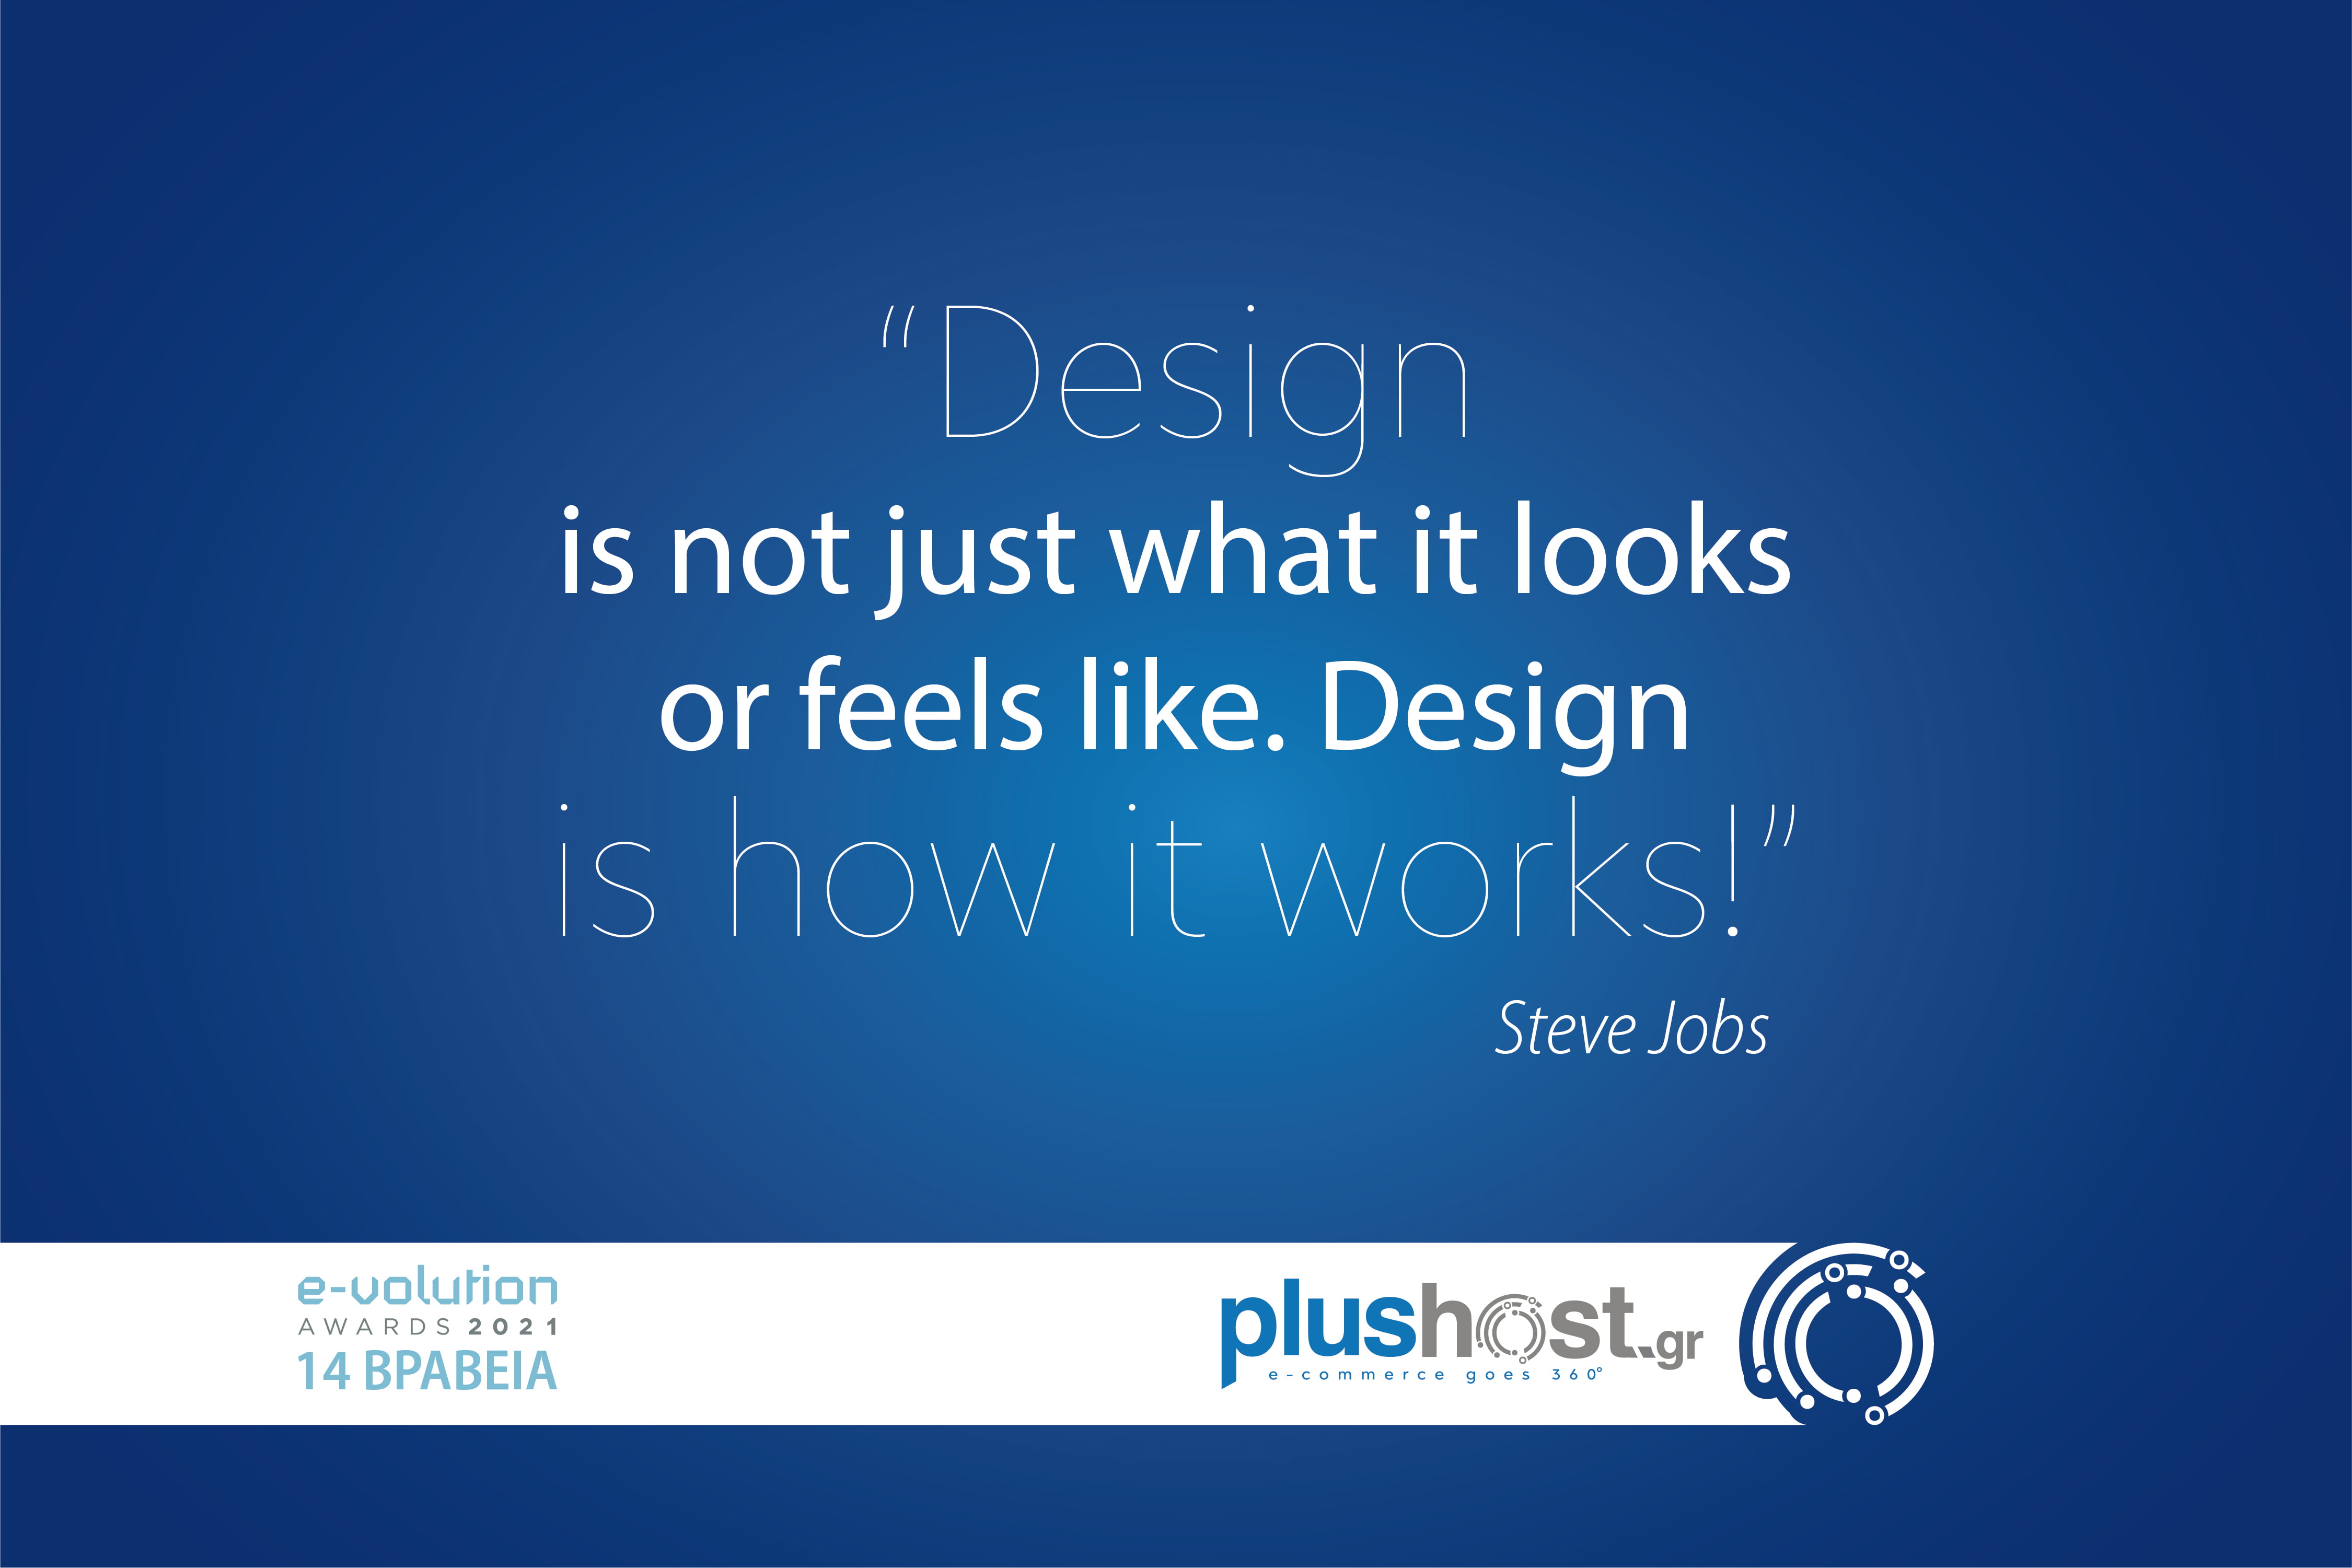 Design is how it works